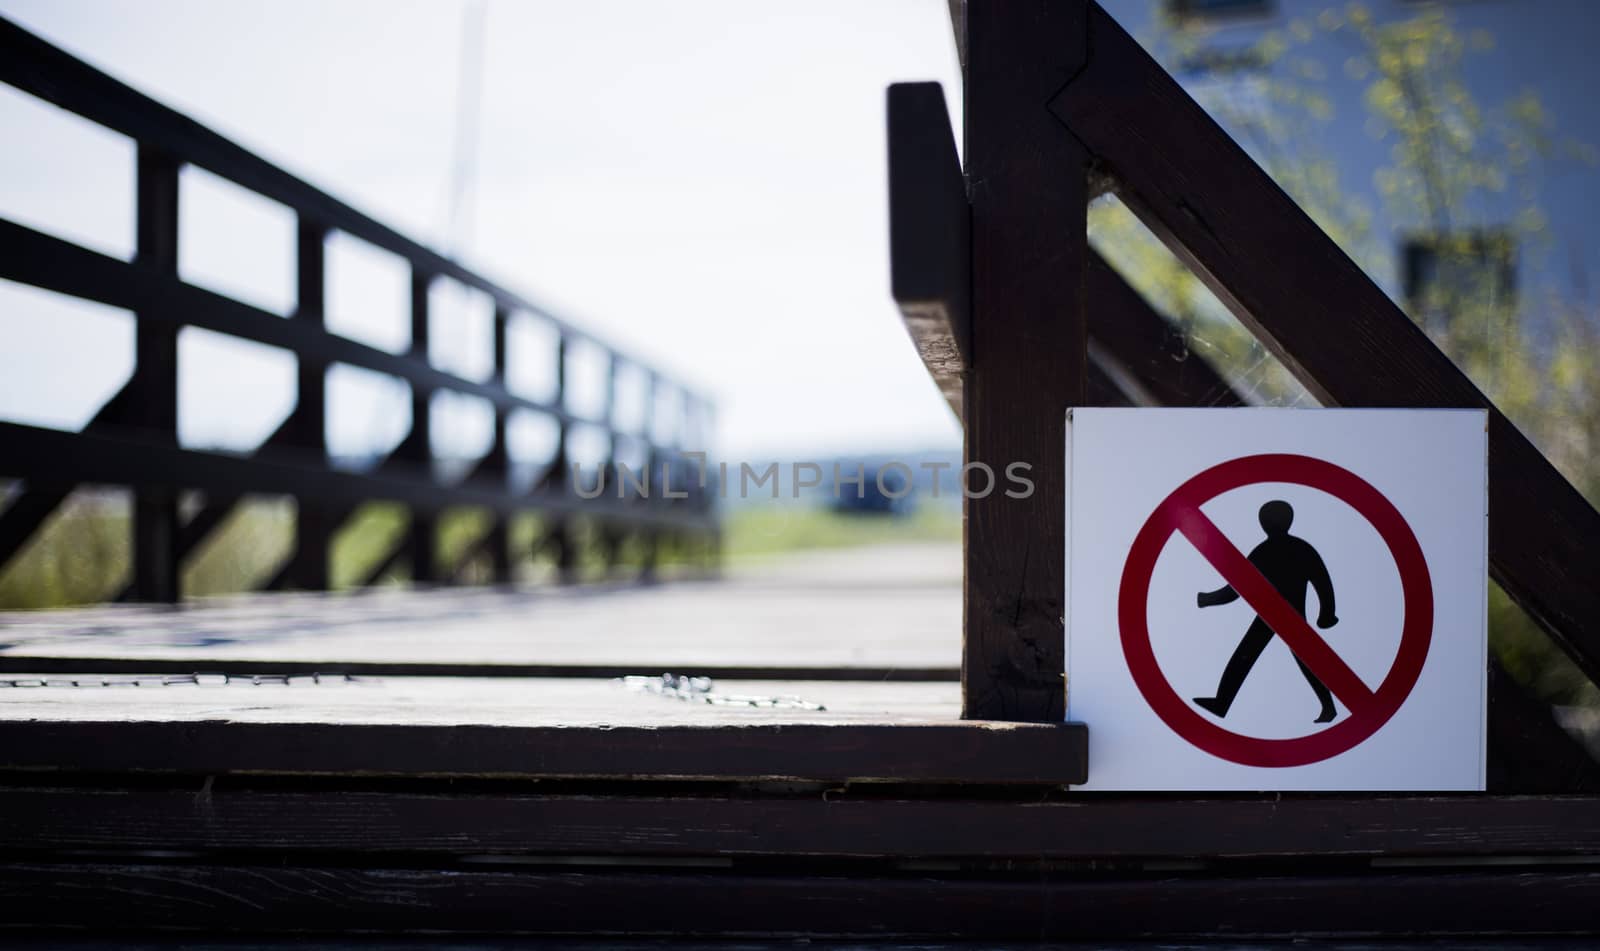 No trespassing sign by photosampler